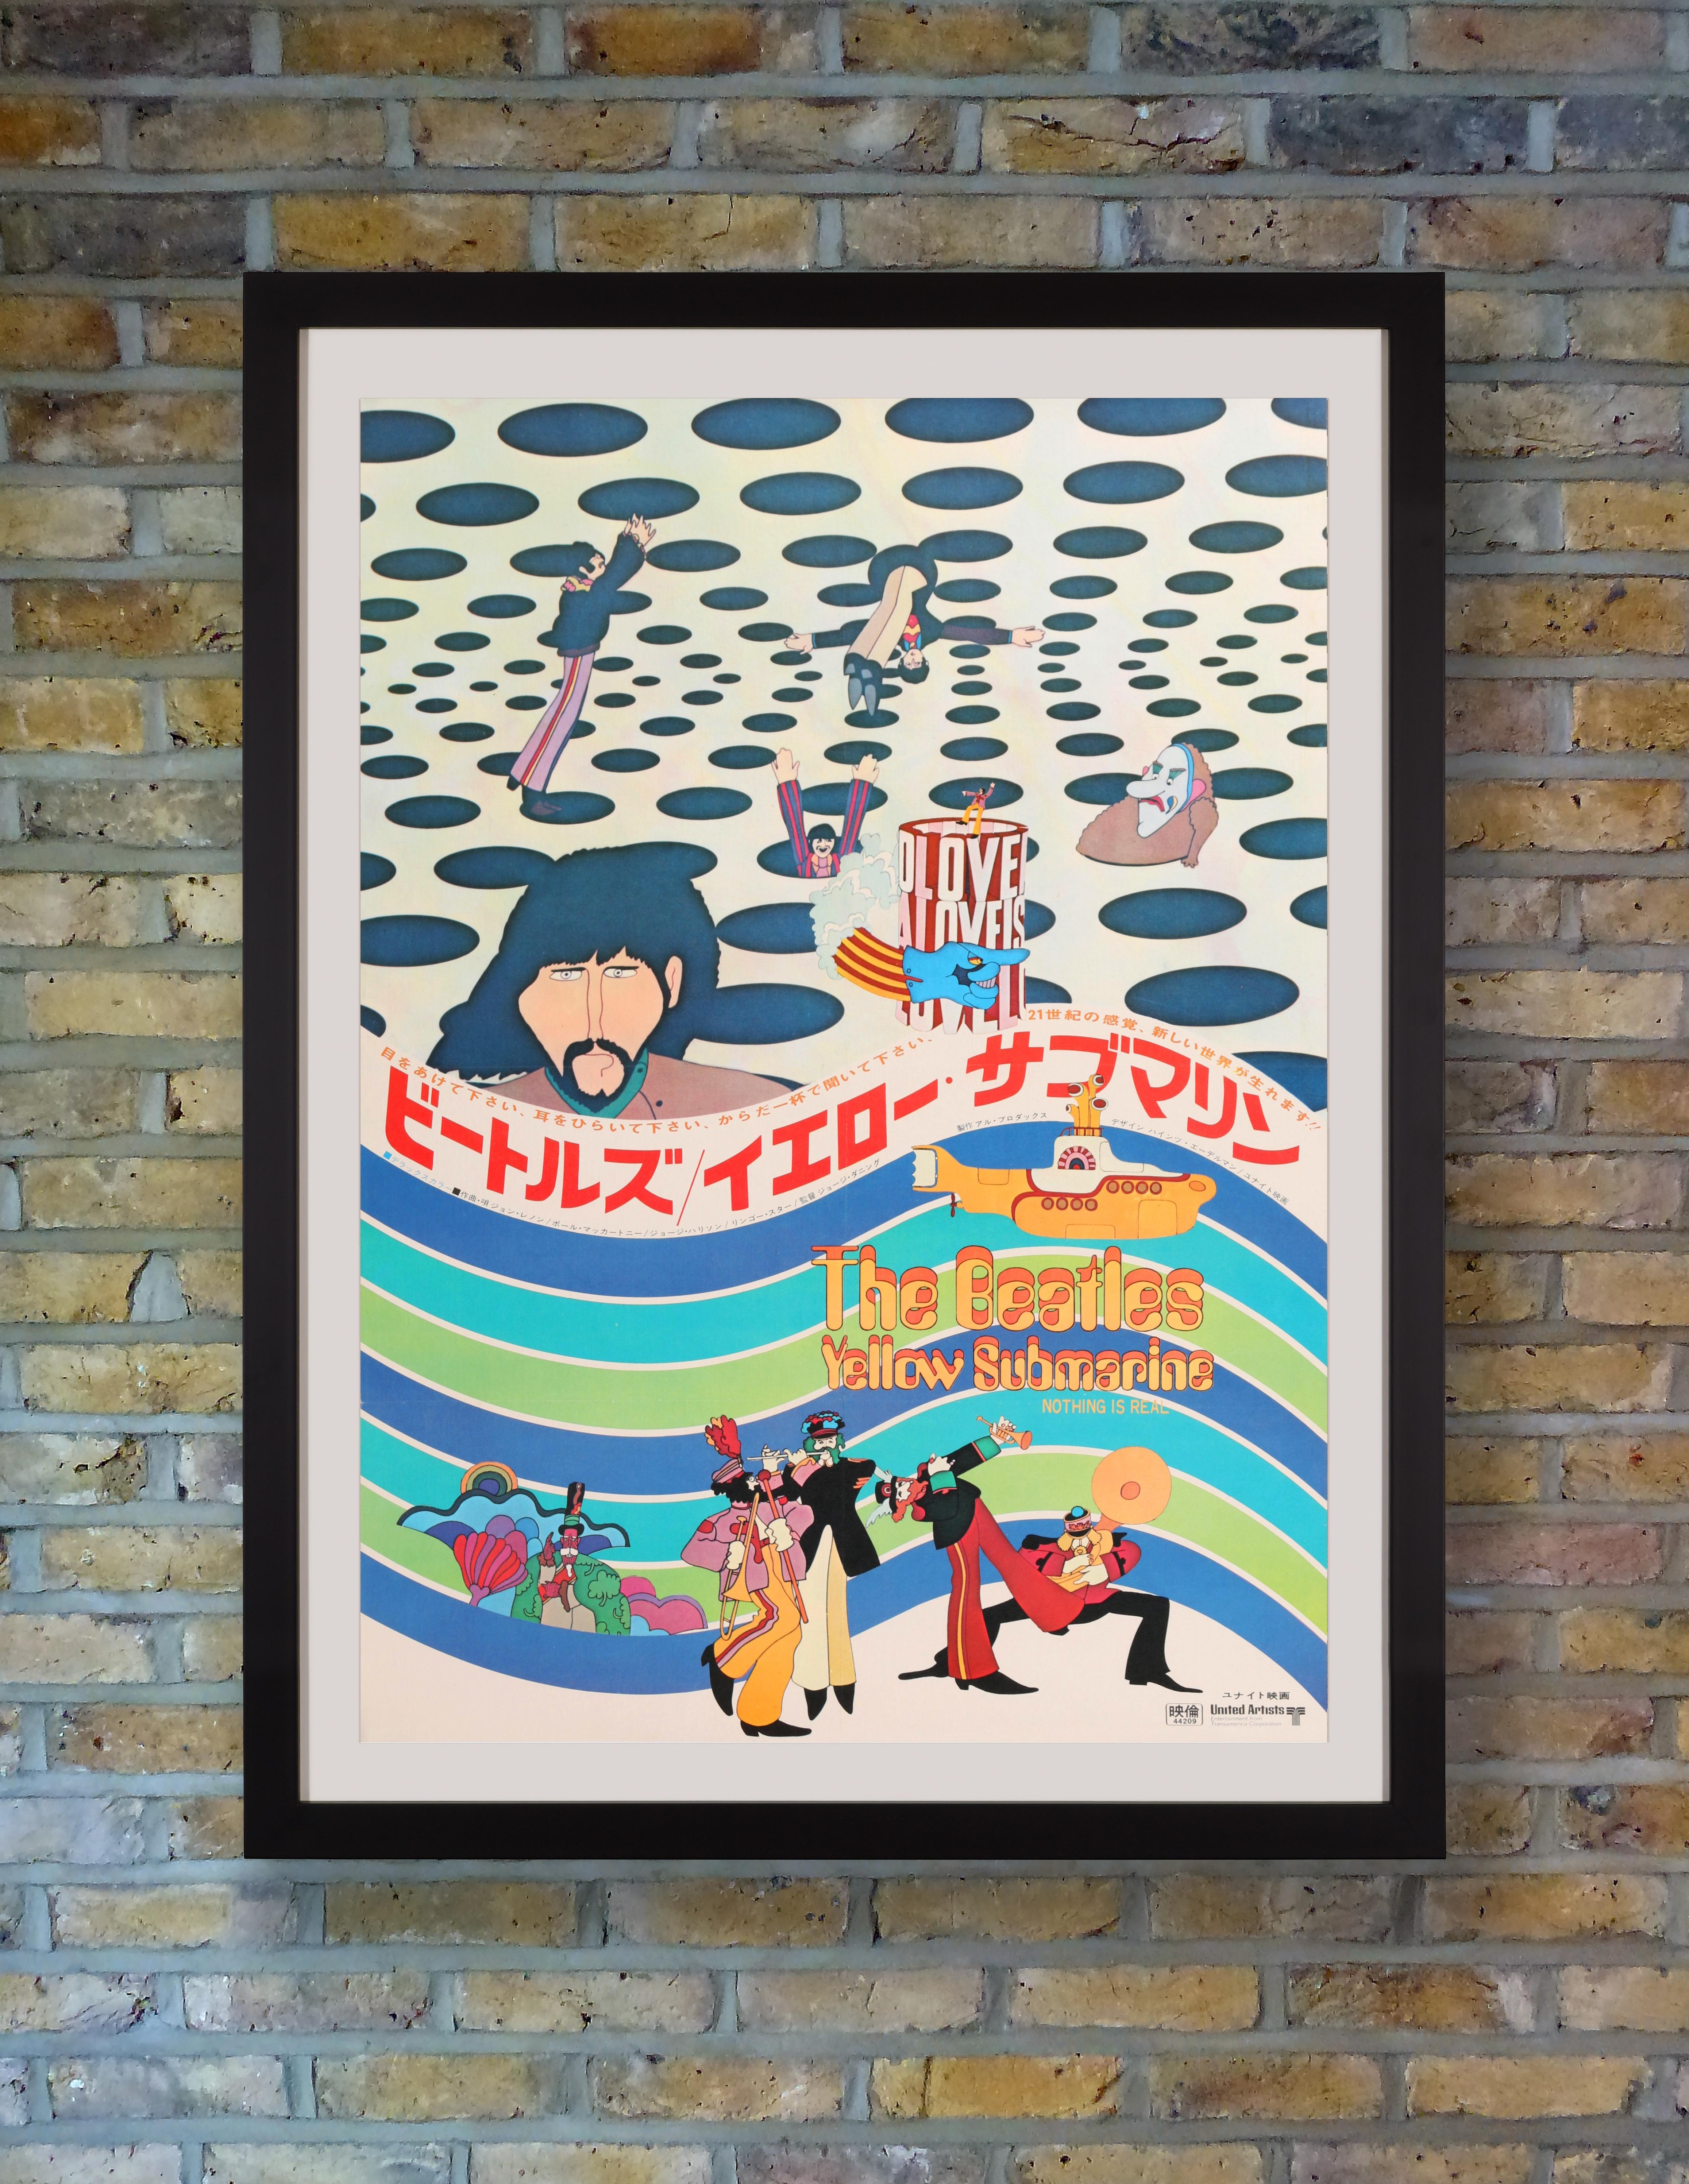 This fantastically bizarre Japanese B2 poster offers some of the best artwork created to promote The Beatles 1968 hit psychedelic musical animation 'Yellow Submarine,' with its optical illusions, lush visuals and colorful characters. Directed by